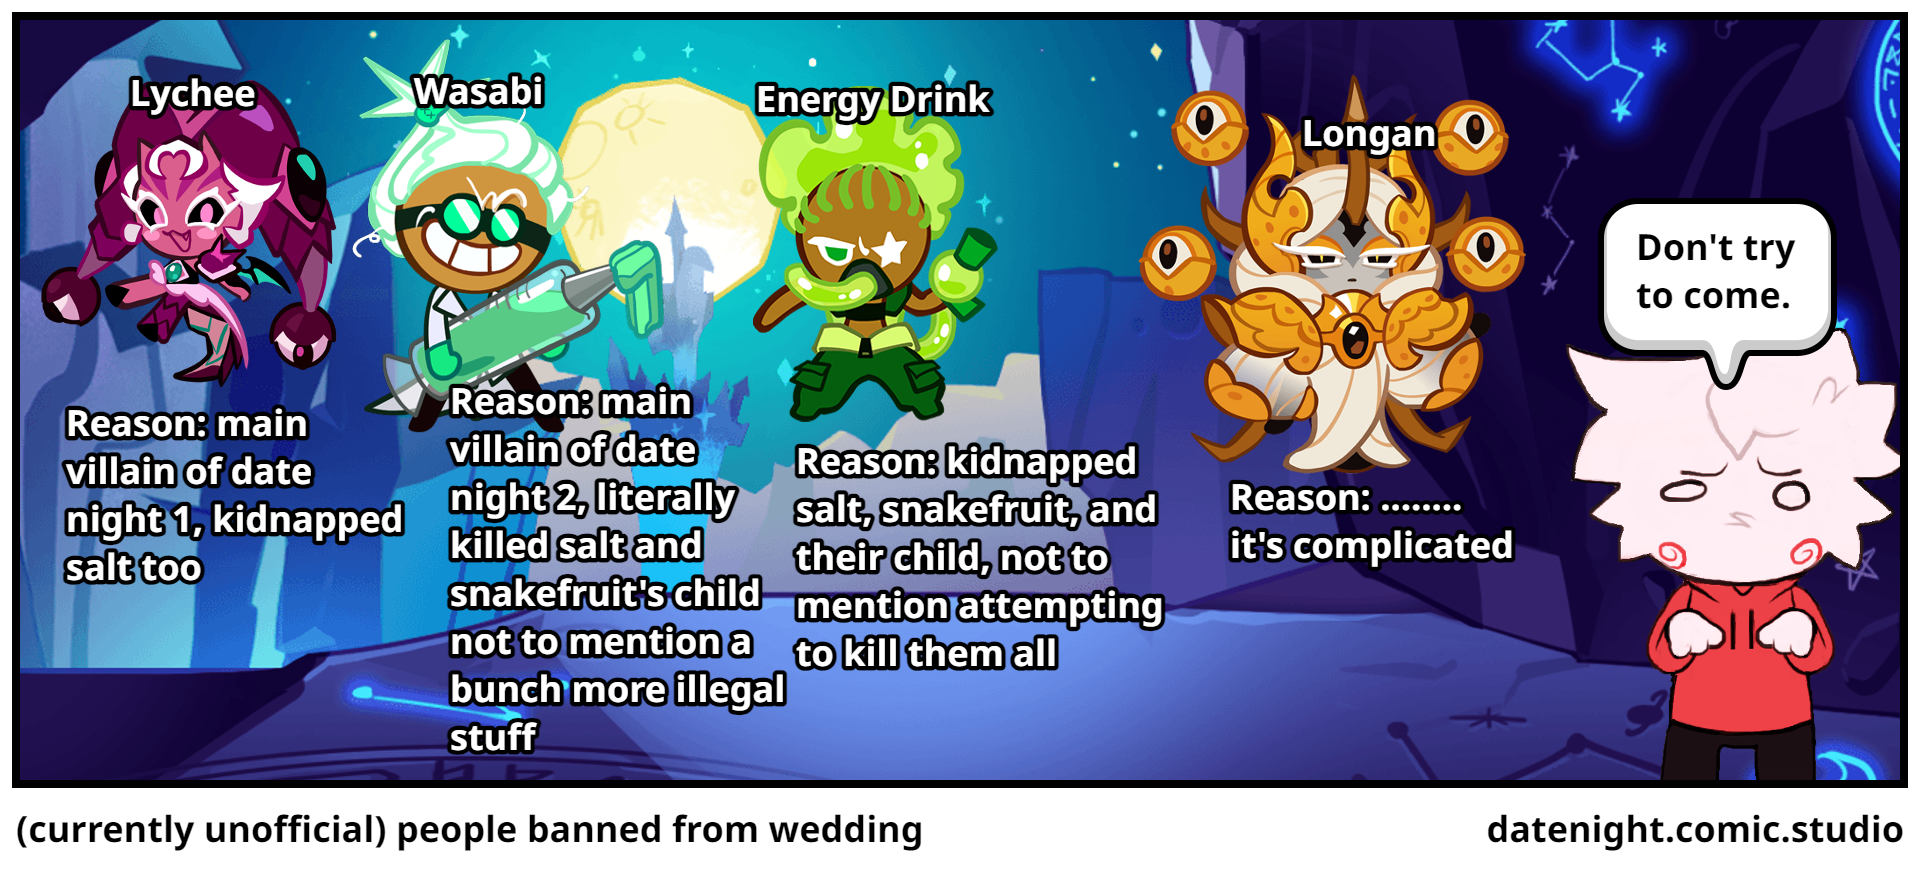 (currently unofficial) people banned from wedding